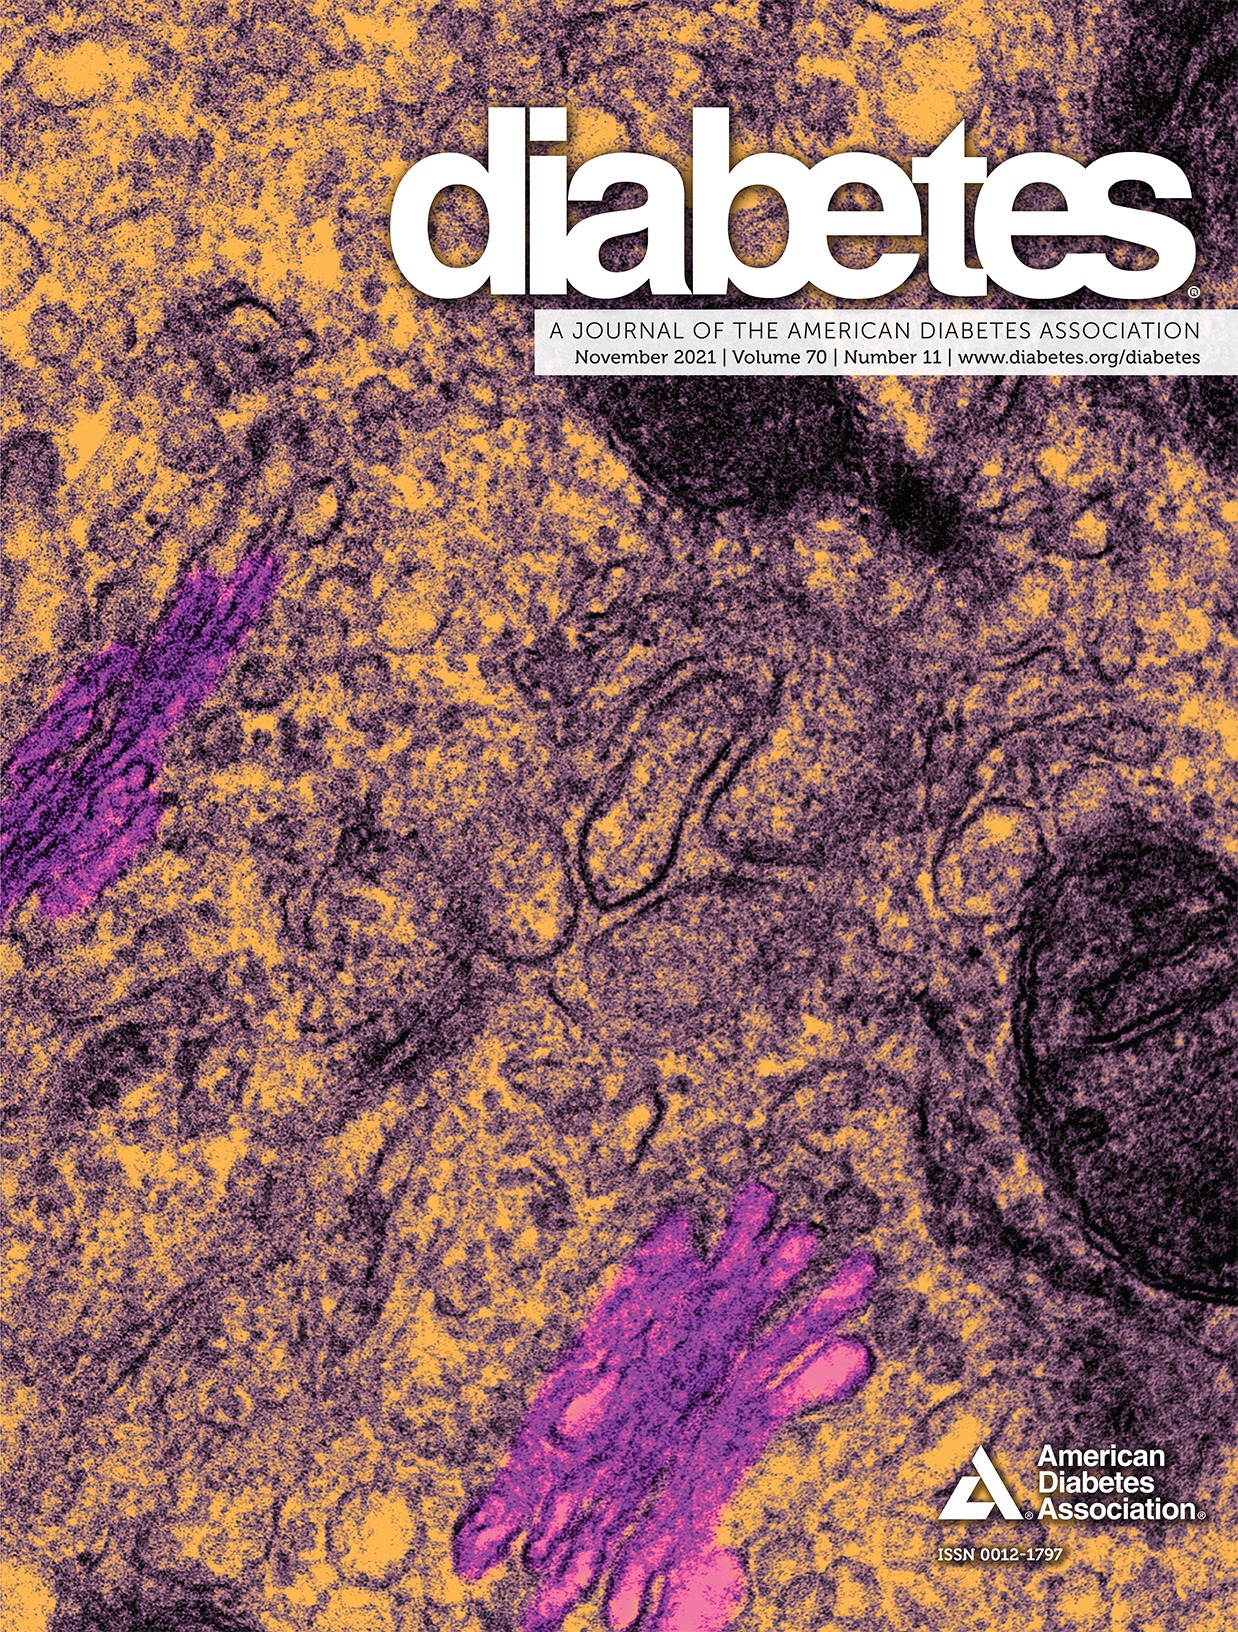 VDR/Atg3 Axis Regulates Slit Diaphragm to Tight Junction Transition via p62-Mediated Autophagy Pathway in Diabetic Nephropathy